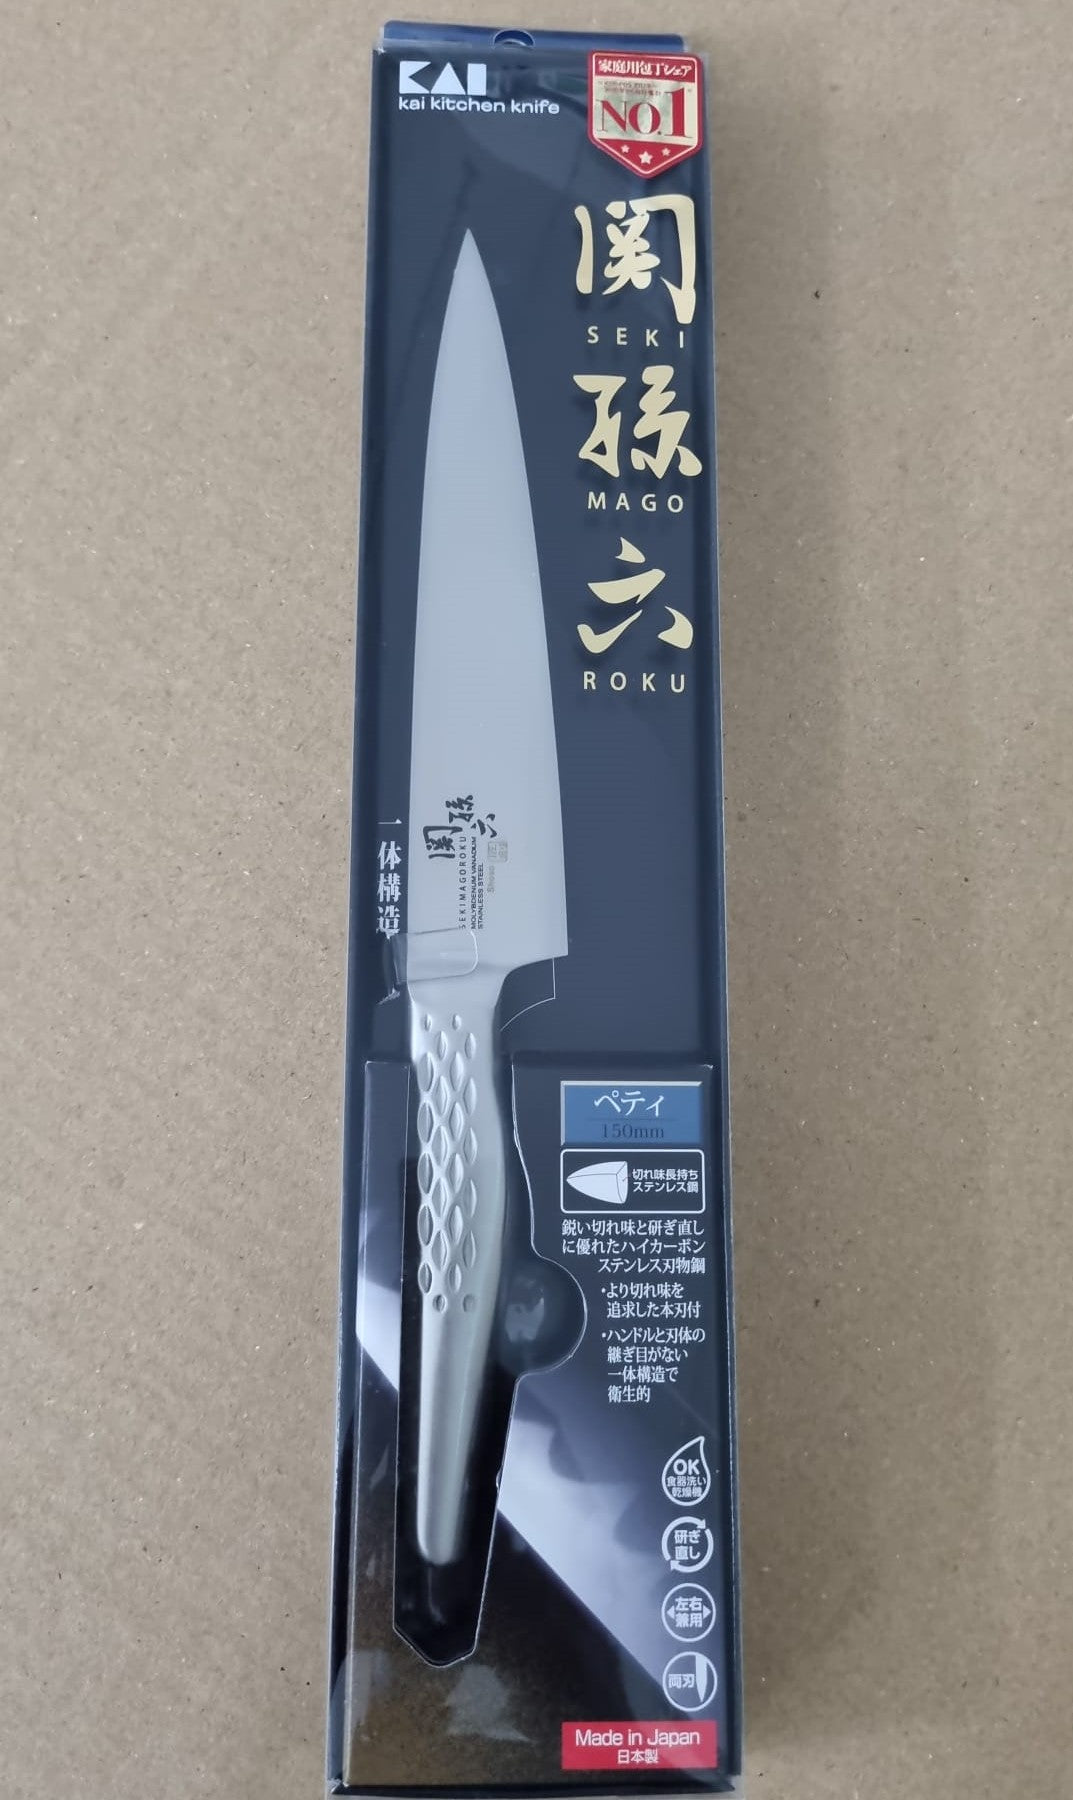 Buy Seki Cutlery Chopper Knife 16cm (160mm) Masahiro MV Black Plywood  MBS-26 Molybdenum Vanadium Laminated Reinforced Wood Handle Double-edged  knife for chopping large pieces of meat along with the bone like a